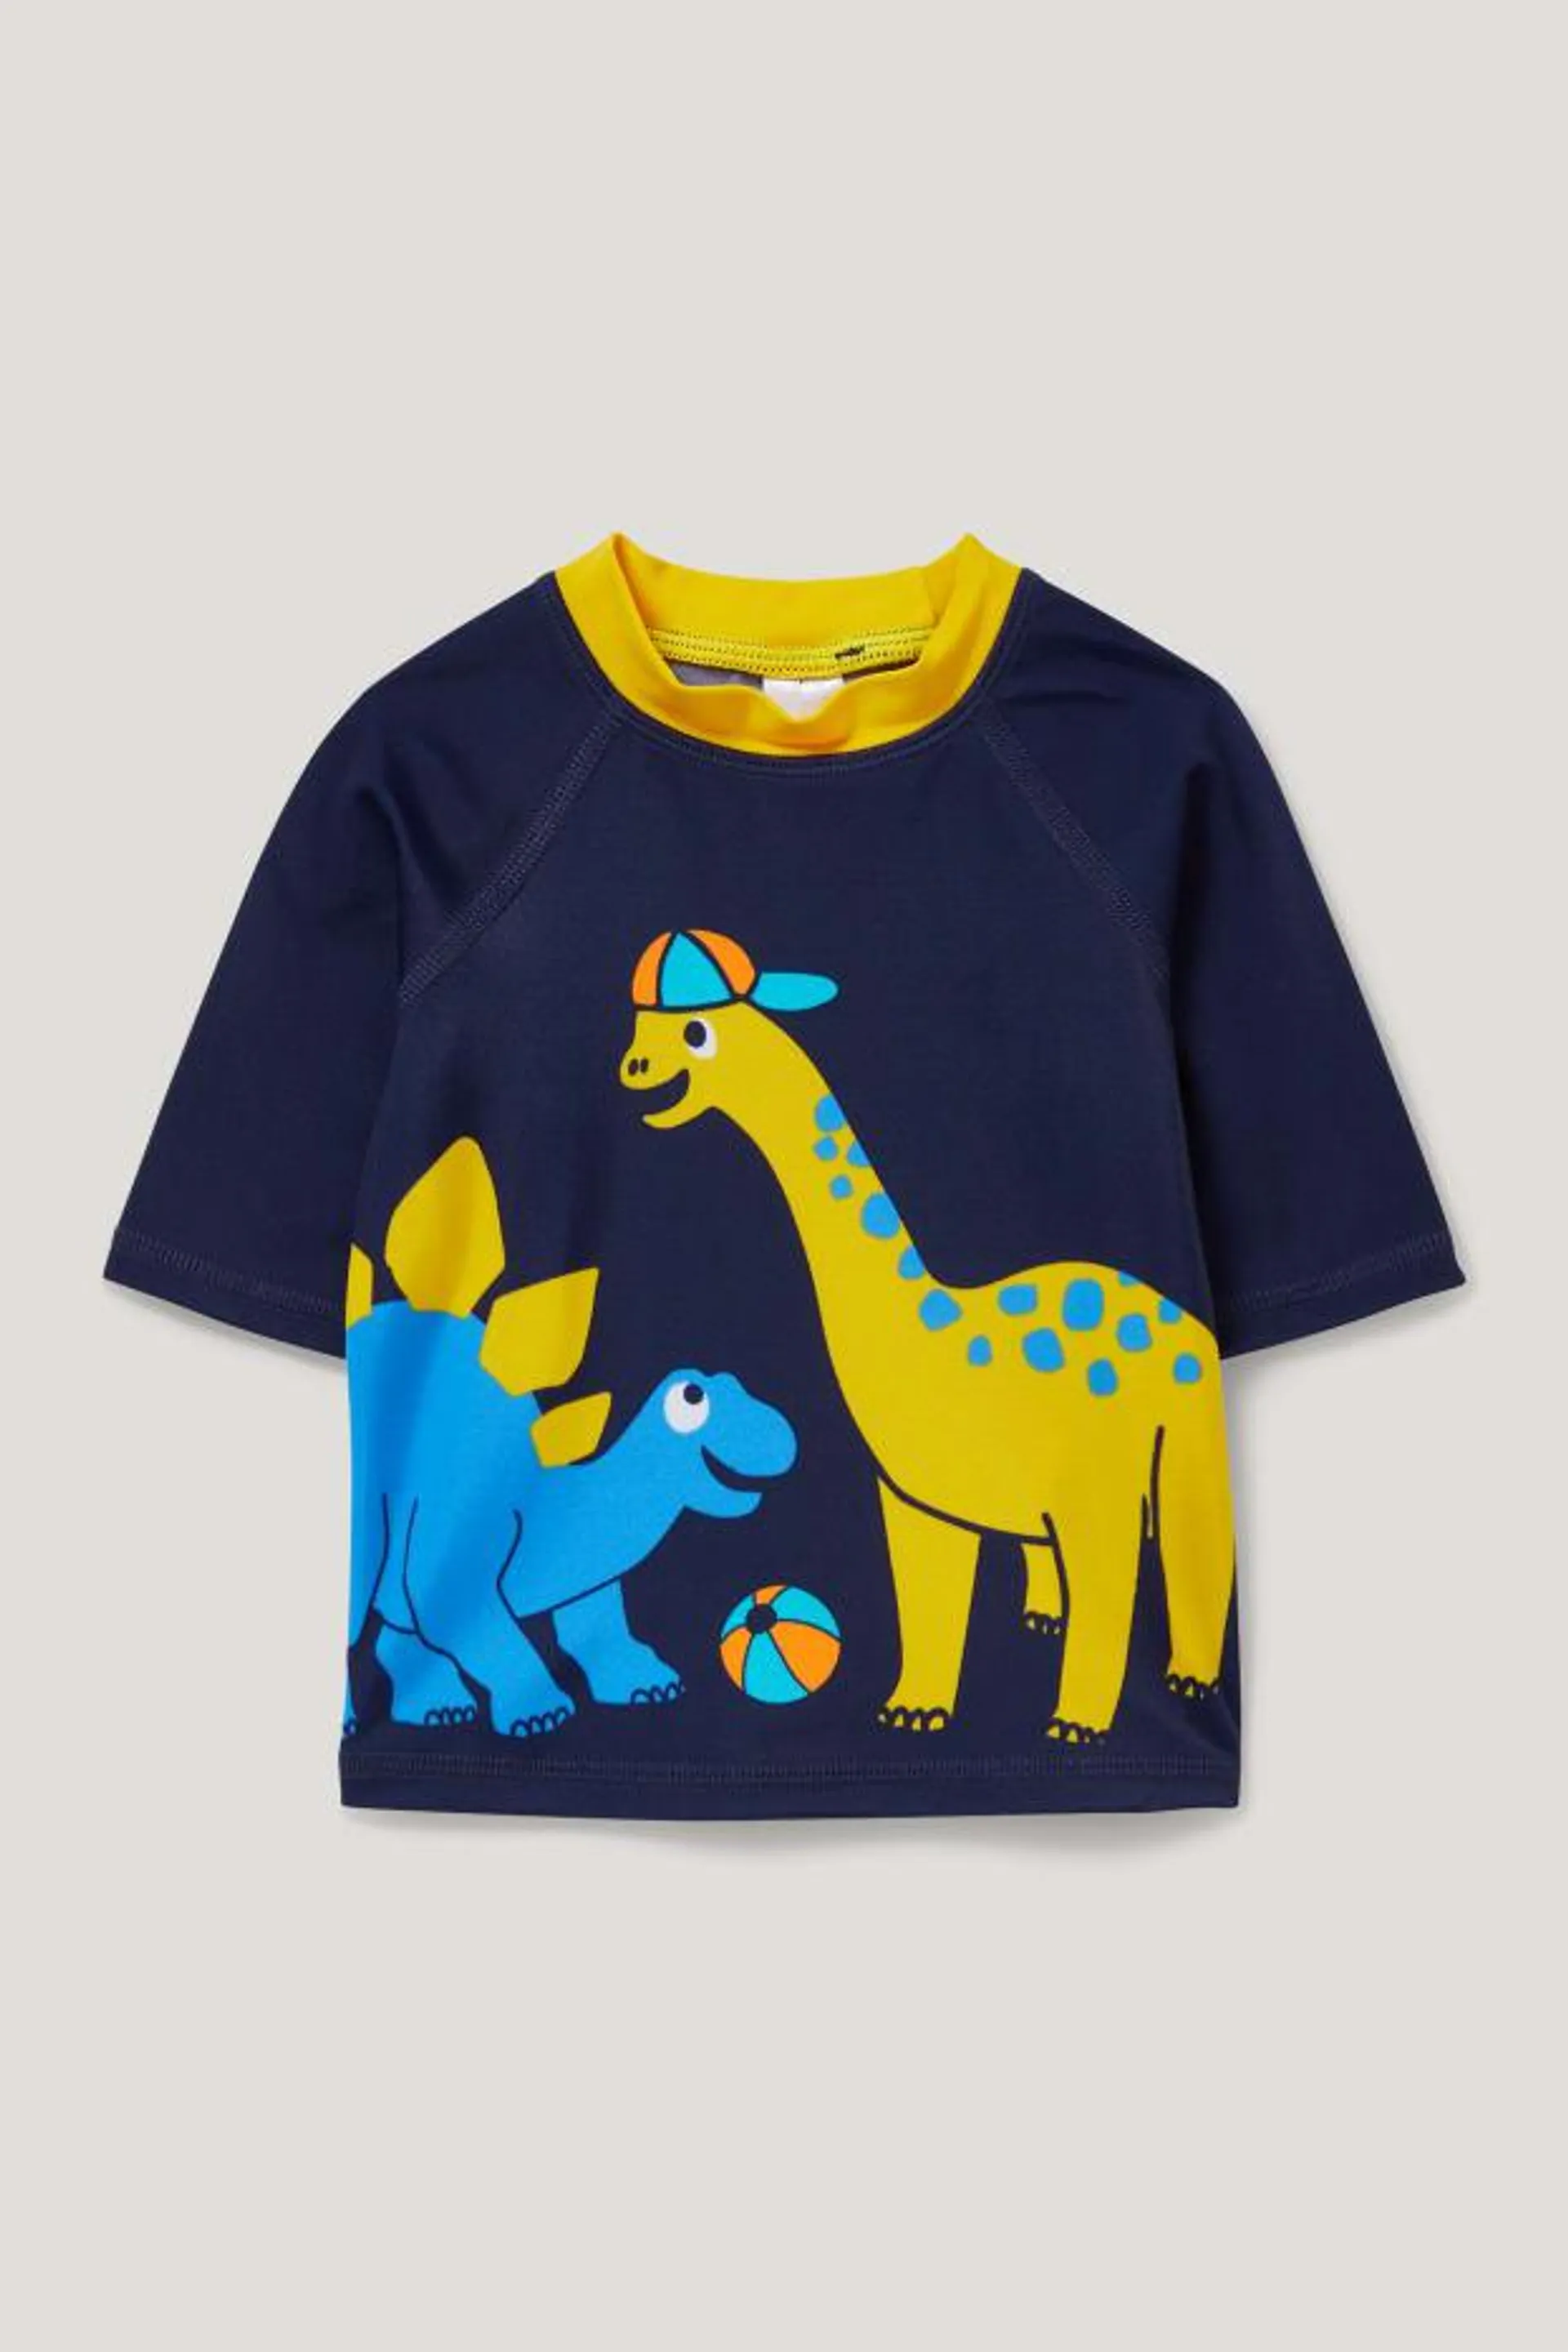 Dino - Baby-UV-Bade-Outfit - LYCRA® XTRA LIFE™ - 3 teilig